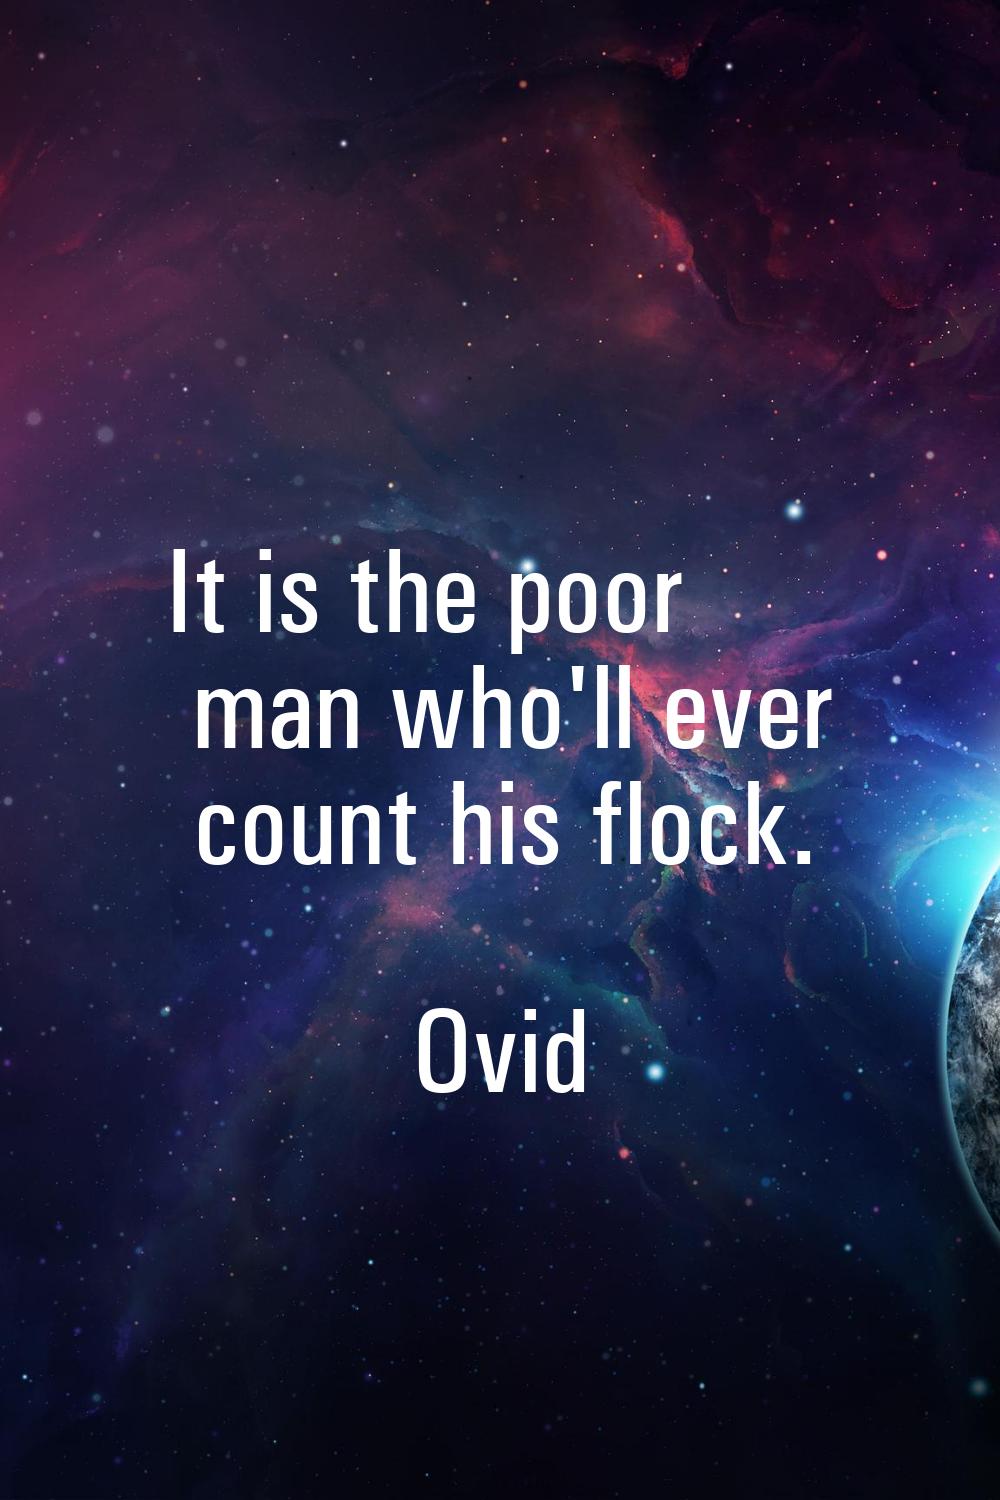 It is the poor man who'll ever count his flock.